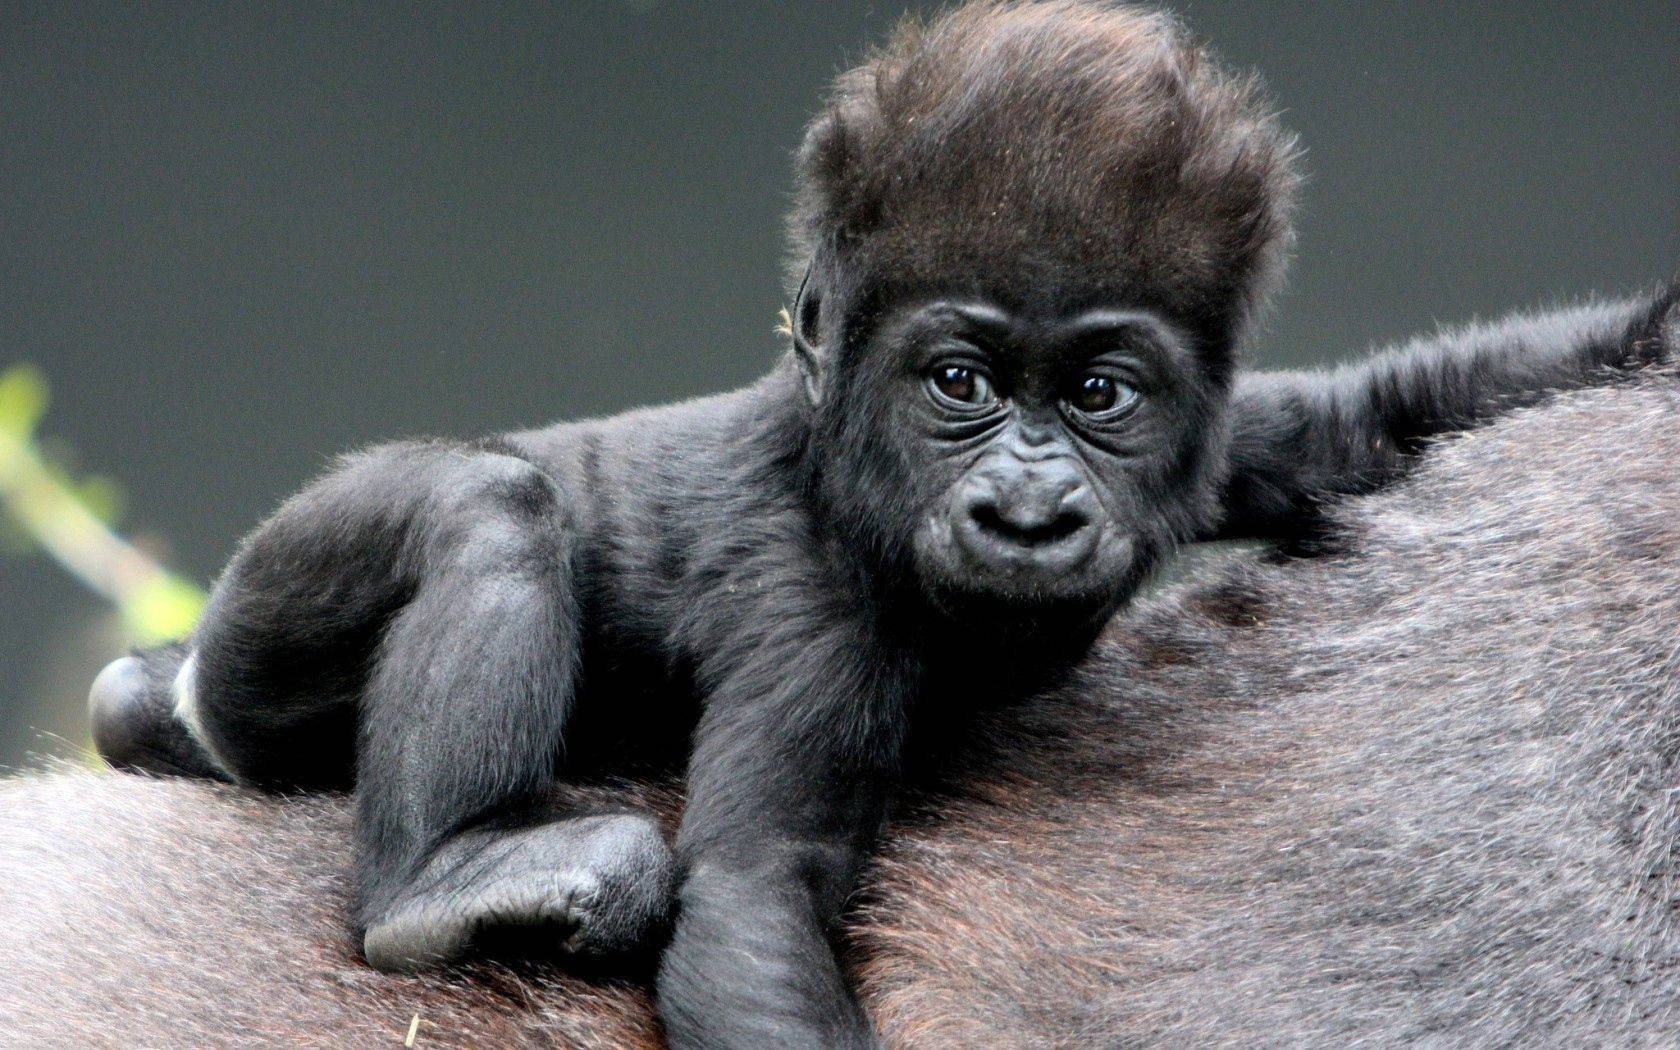 A Baby Gorilla Enjoys Its Time Playing In The Woods. Background